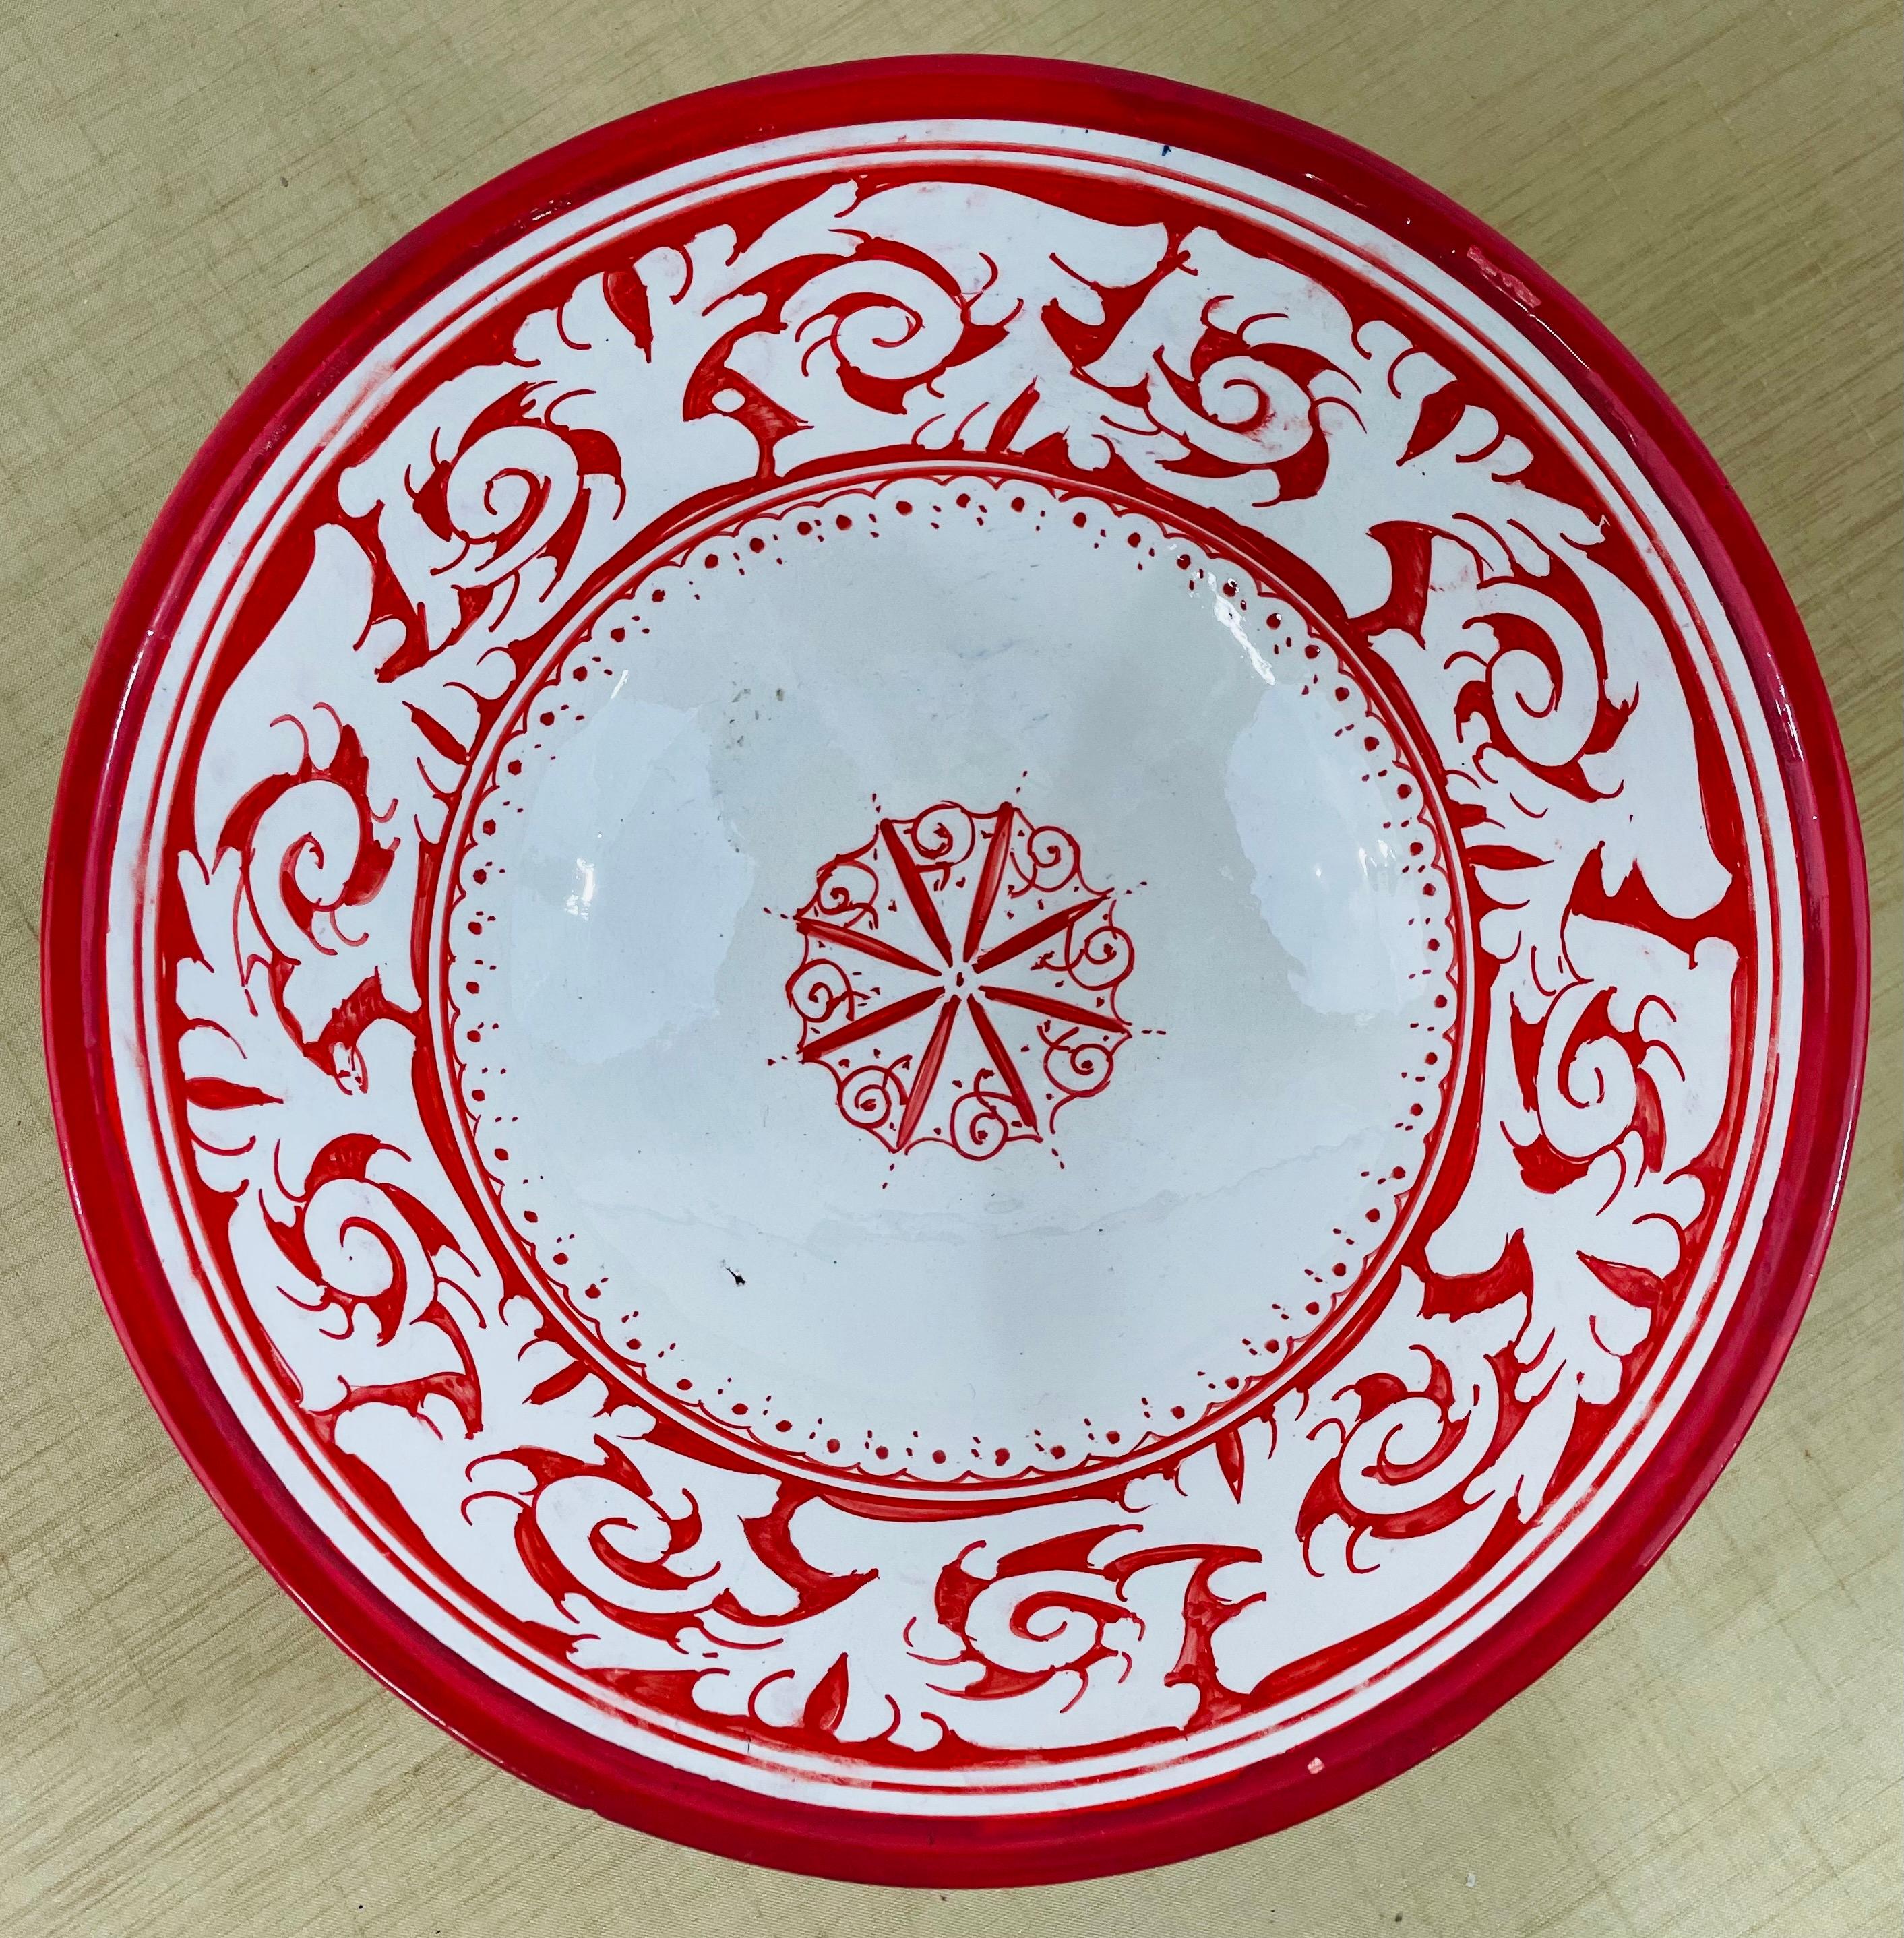 A set of 2 large vintage tribal Moroccan hand painted Pottery bowls. One bowl is finely painted in a red on white floral design and the second bowl features intricate floral and geometrical motifs with brown as a dominant color. Perfect bowls to